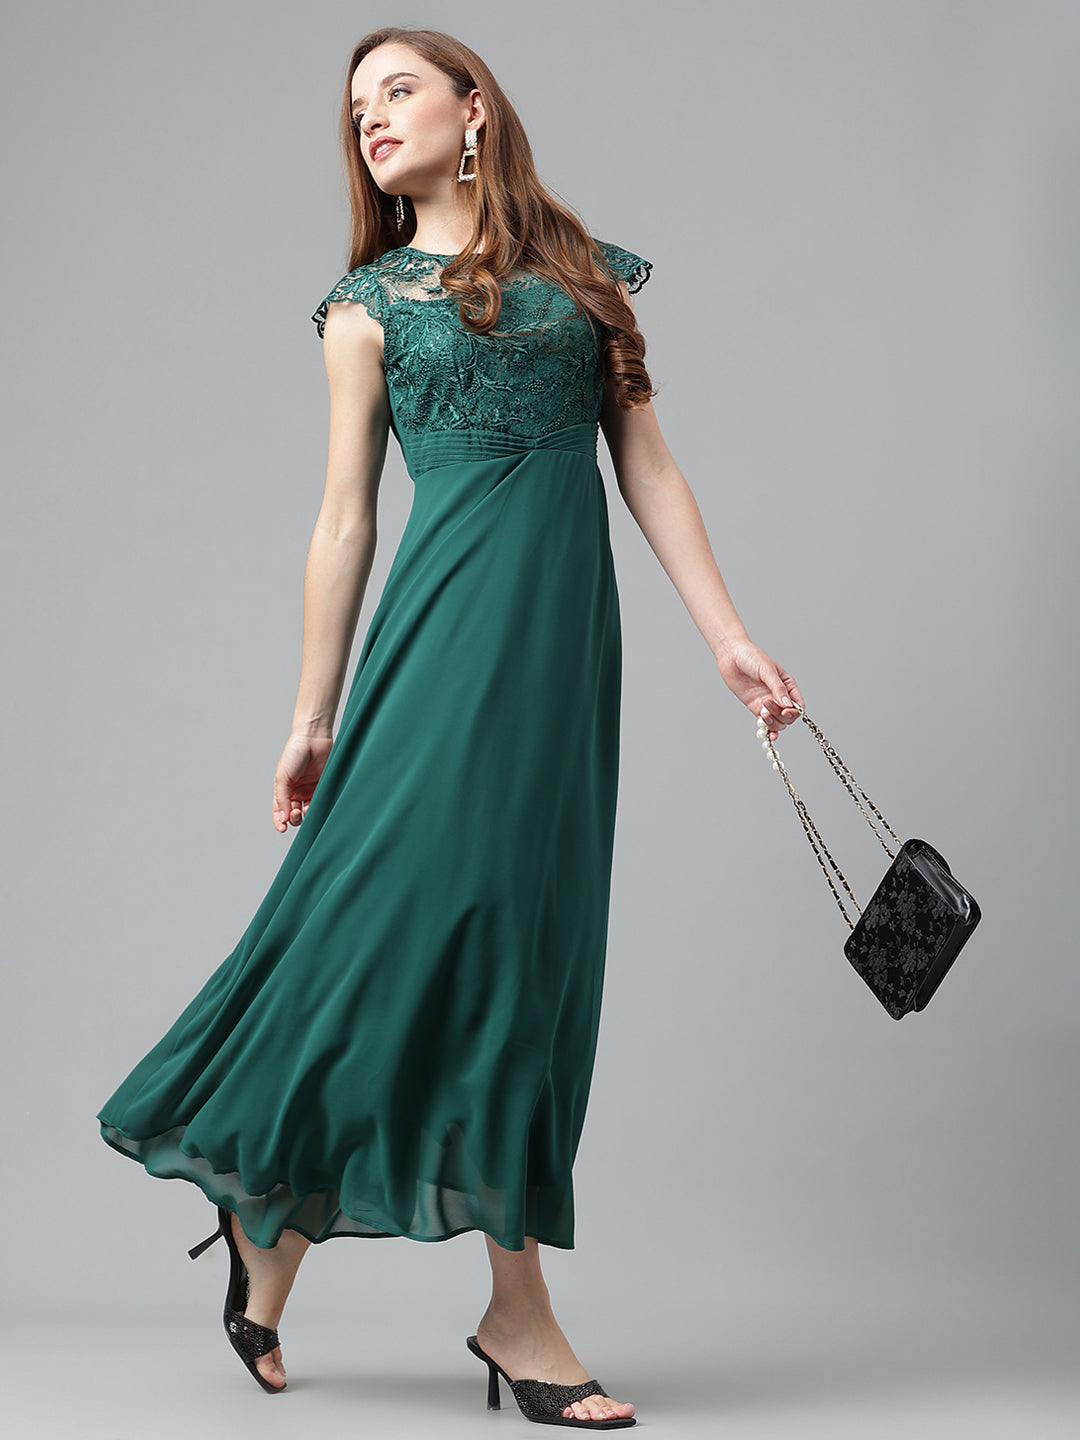 Greenforst Half Sleeves Round Neck Solid Maxi Dress For Casual Wear